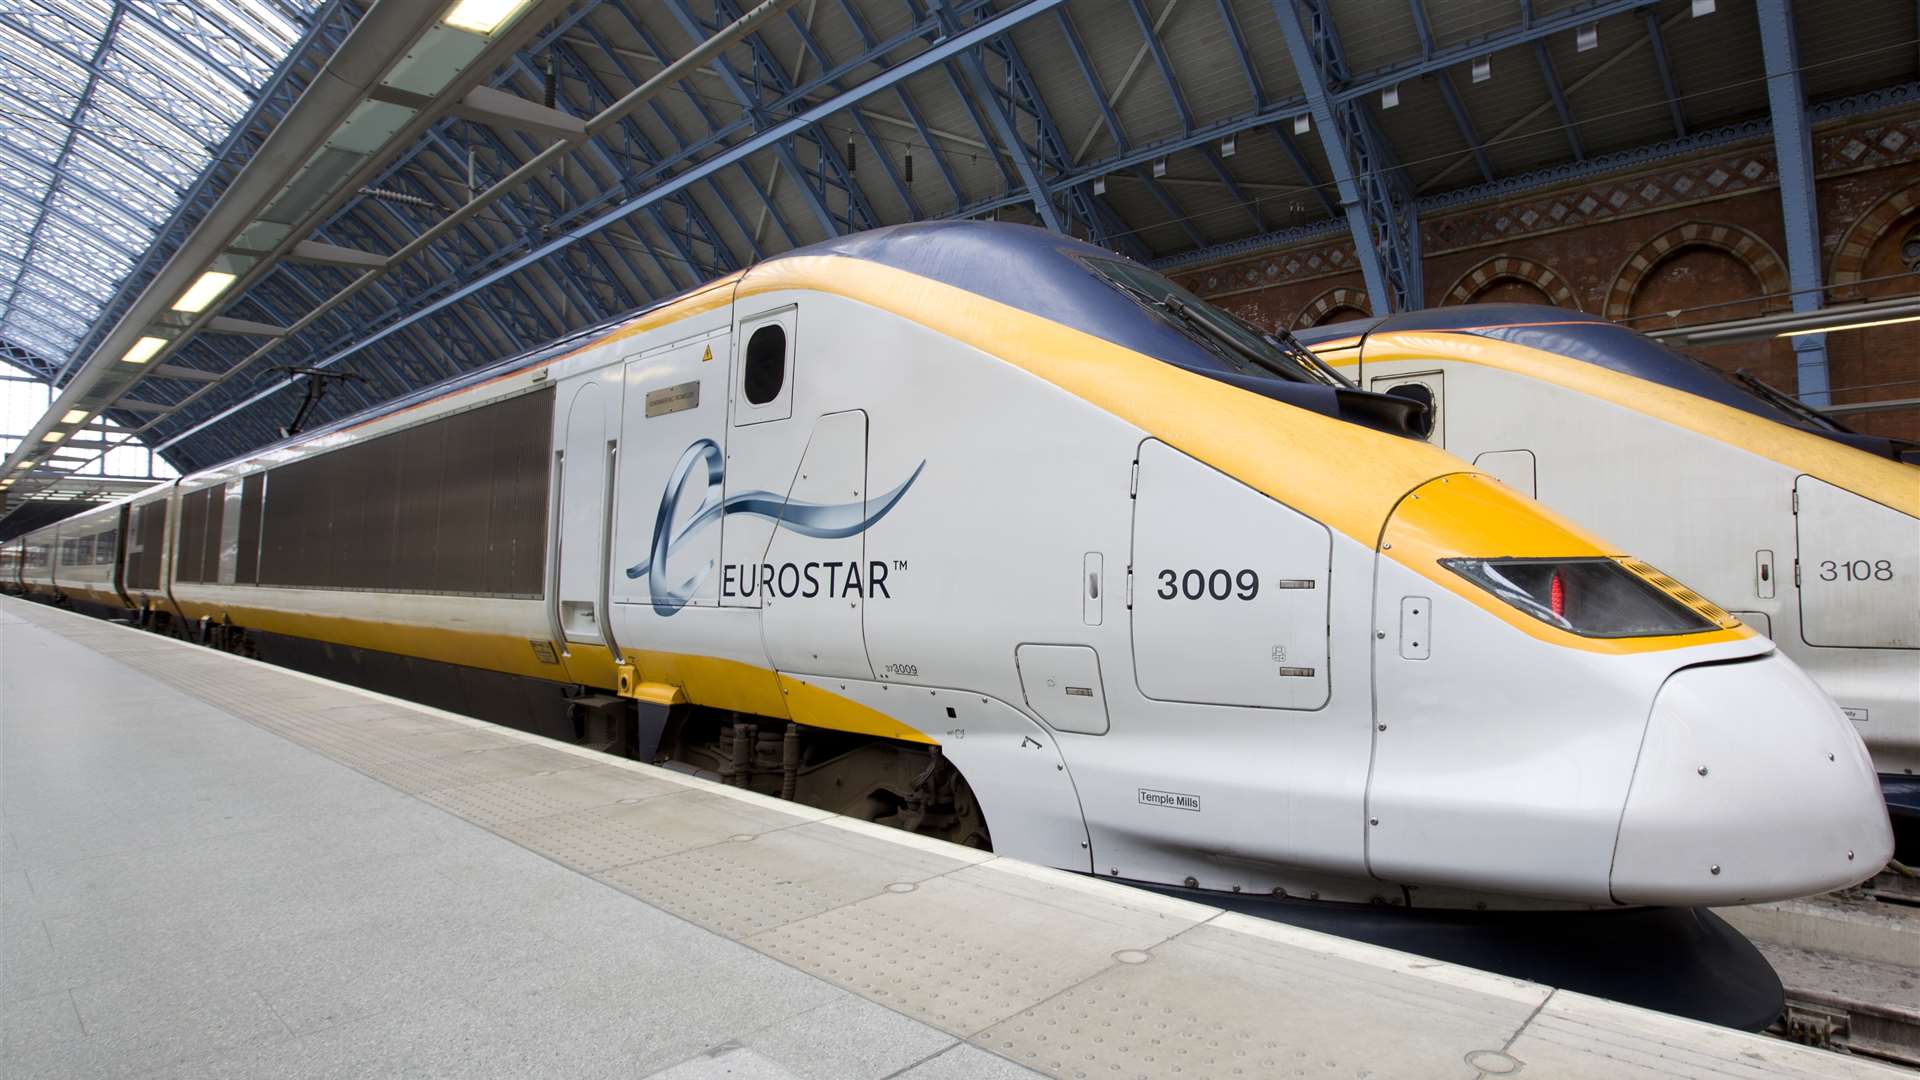 Eurostar suffered an underlying operating loss in 2016